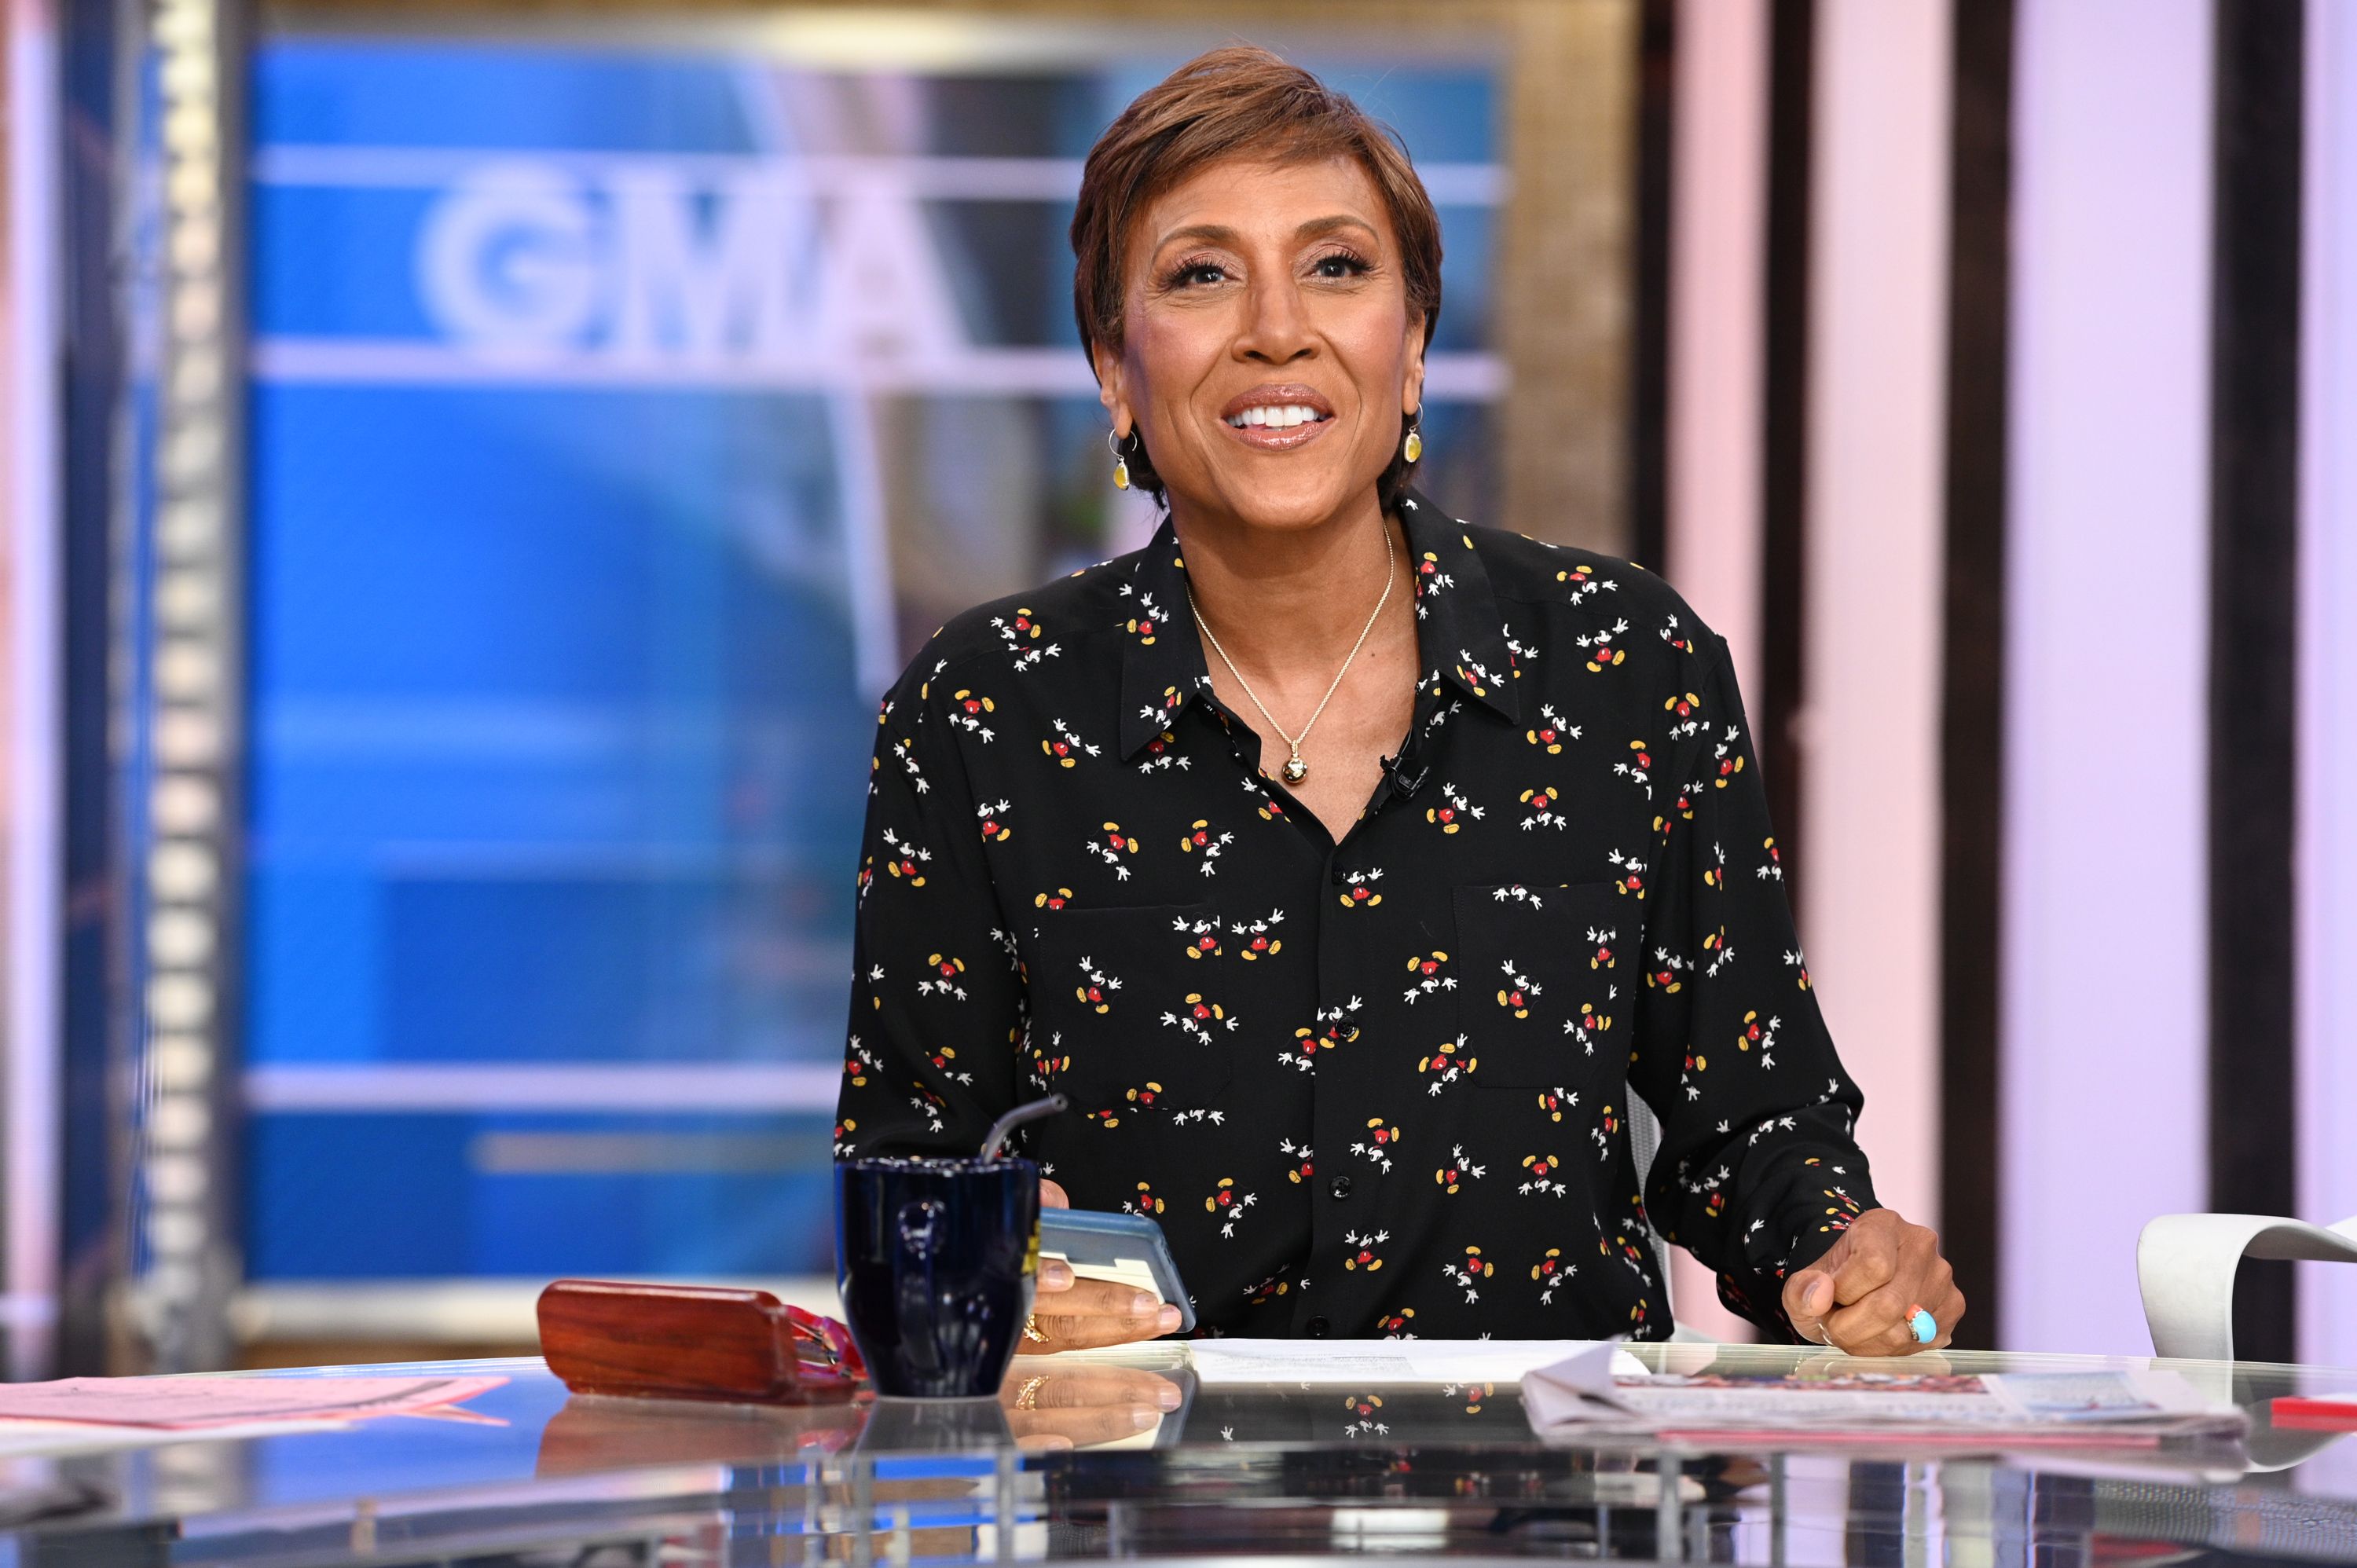 Robin Roberts celebrates her 30th year with ABC on "Good Morning America," on Wednesday January 15, 2020 | Photo: Getty Images